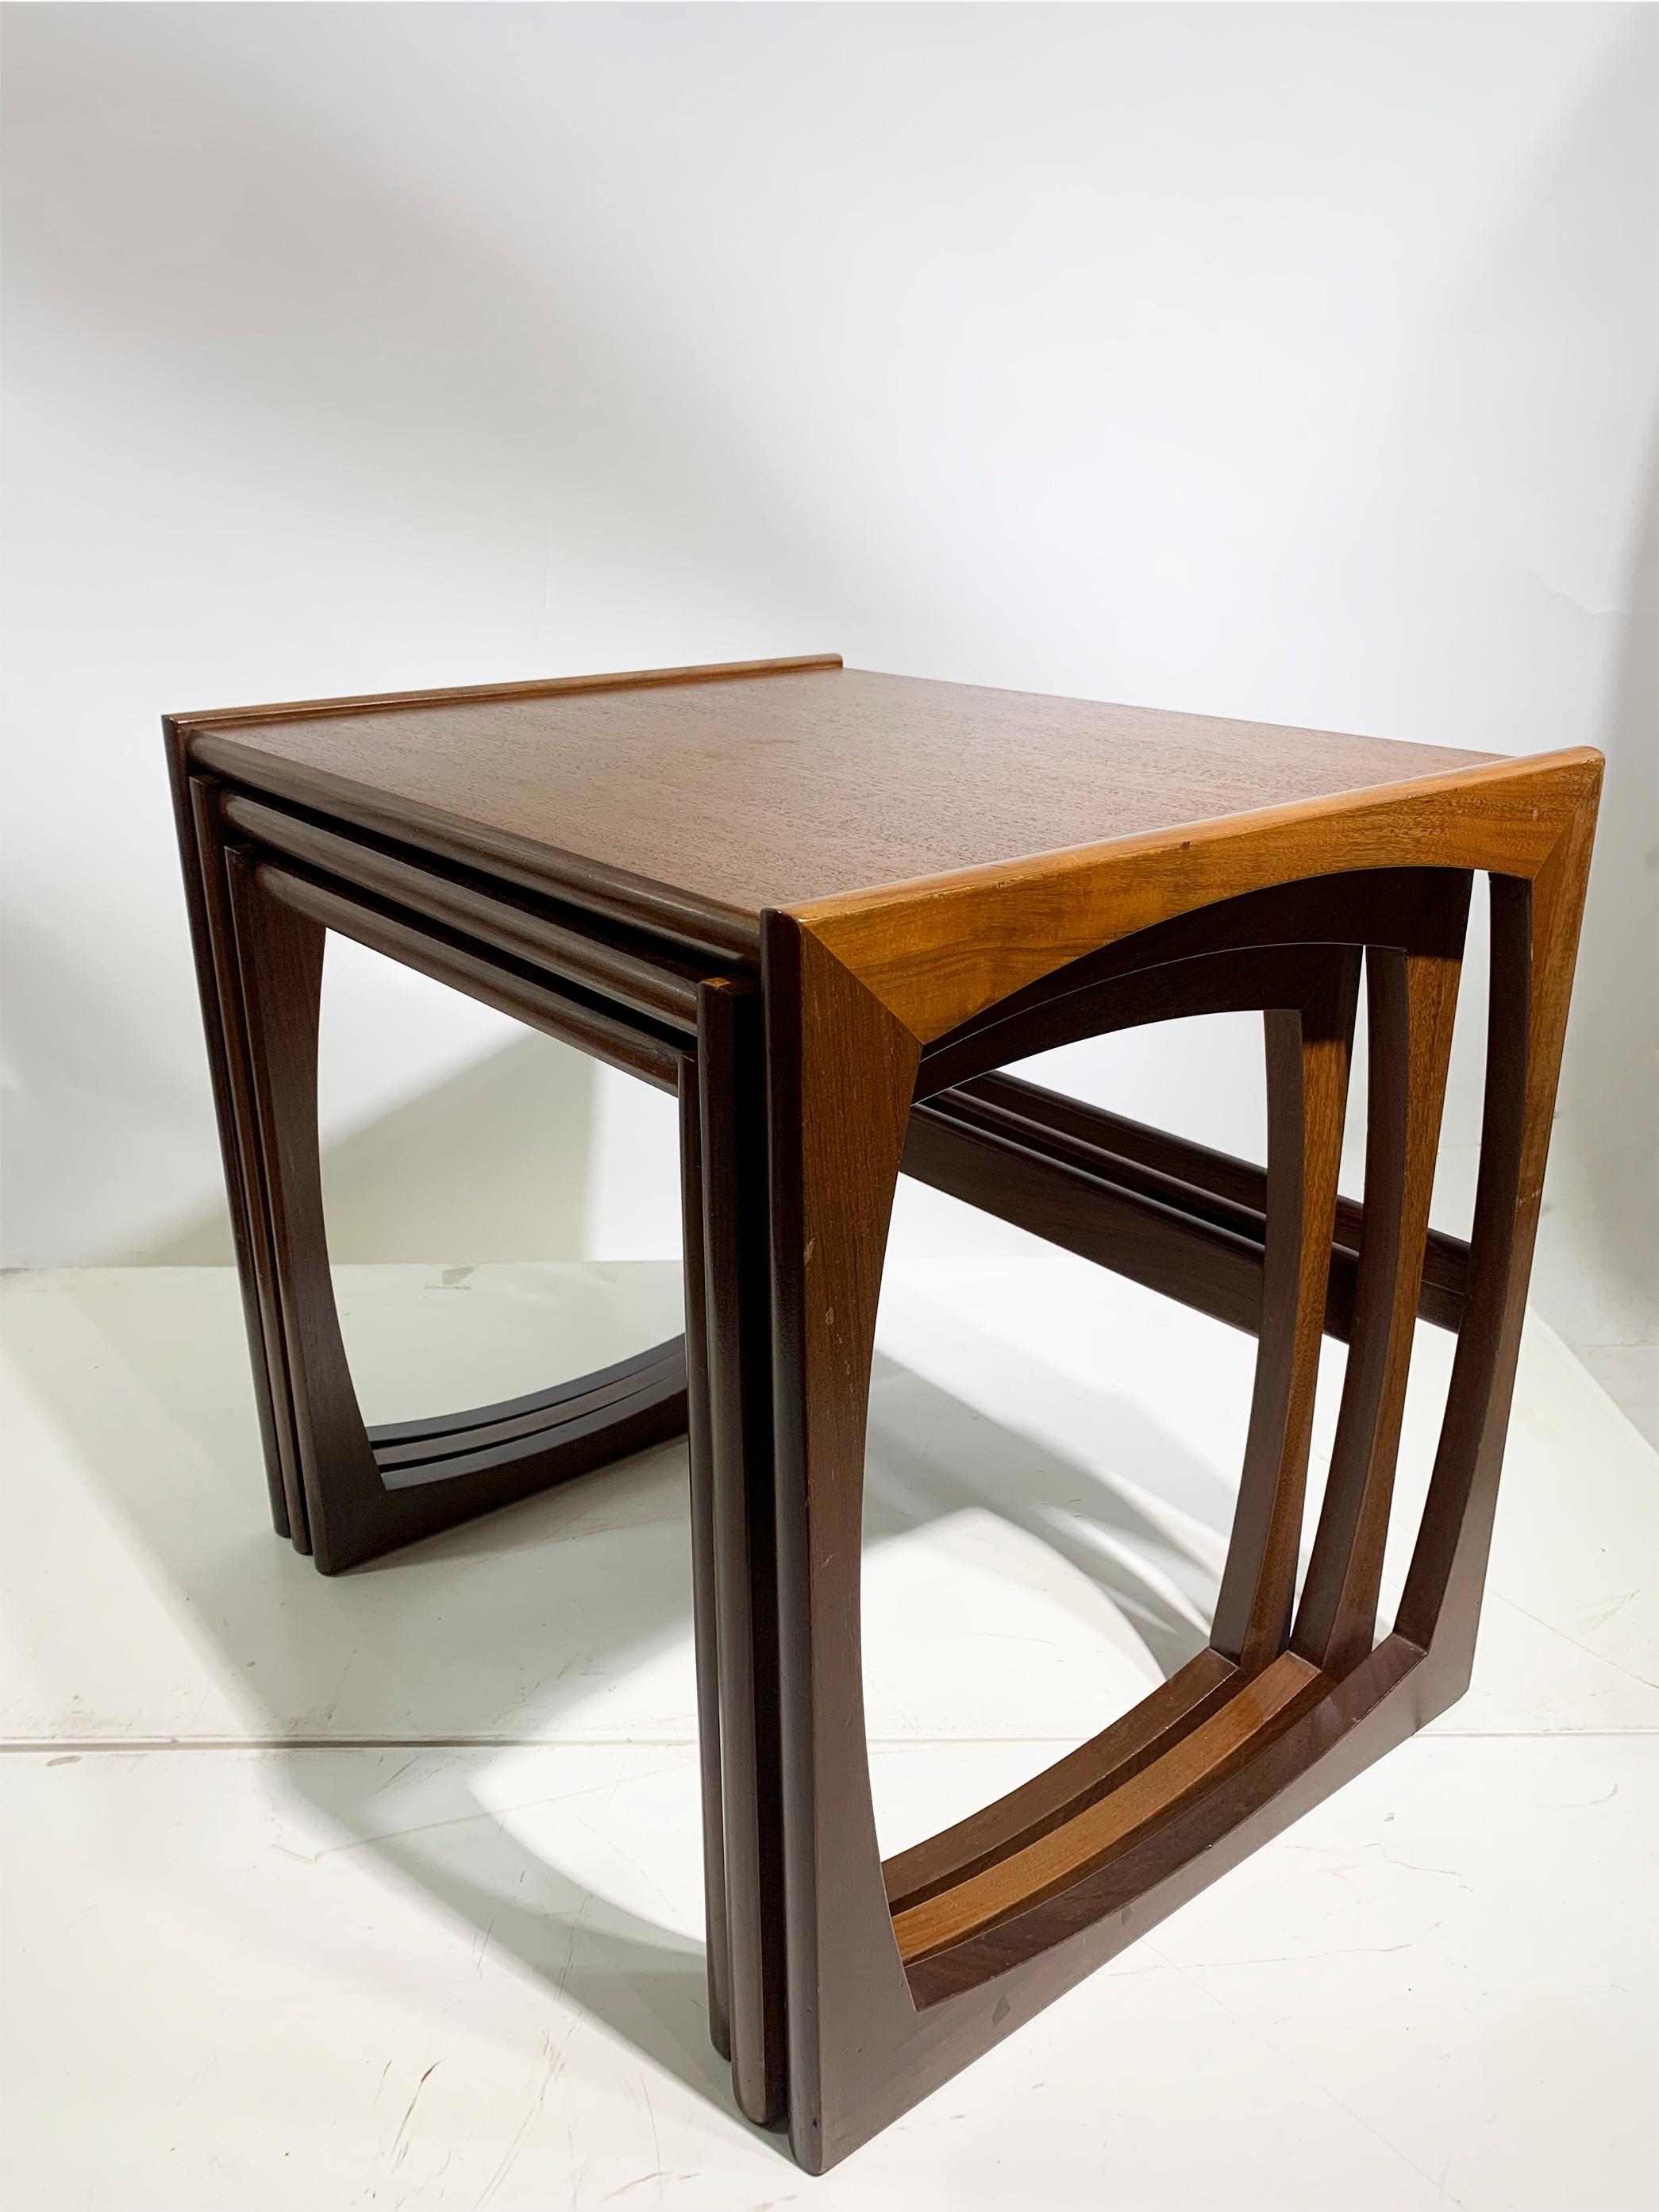 Featuring a breathtaking and emblematic design, these teak nesting tables are a remarkable creation by G Plan. Originating from the esteemed Quadrille range, these tables were meticulously crafted in England during the 1960s.

The craftsmanship of